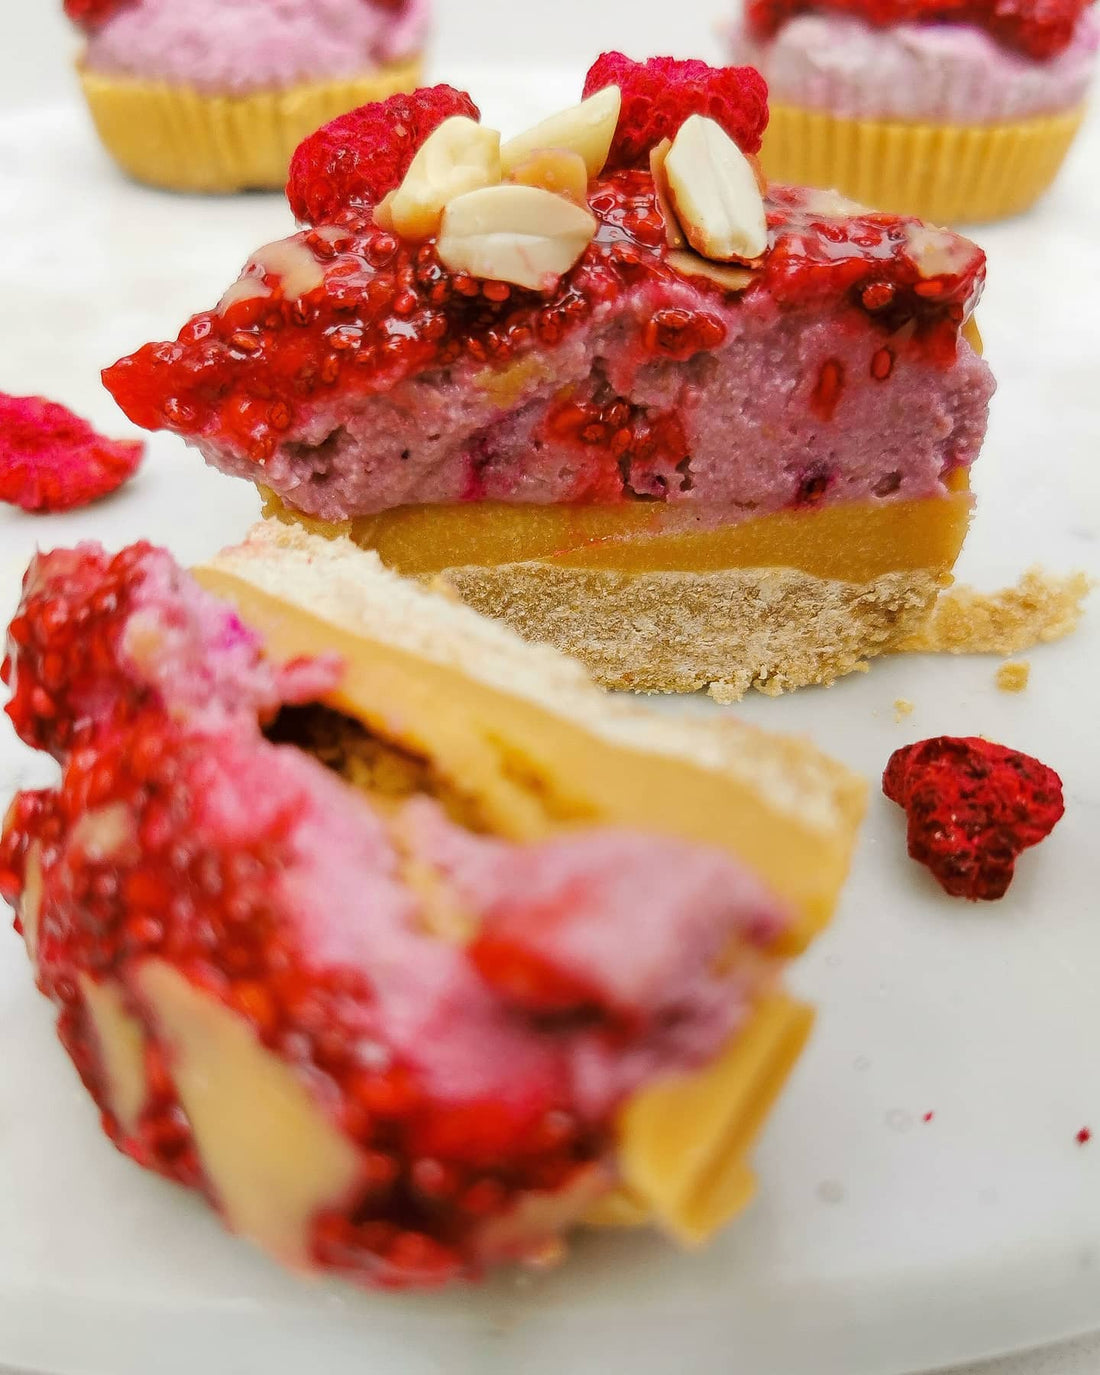 PEANUT BUTTER AND JELLY CHEESECAKES